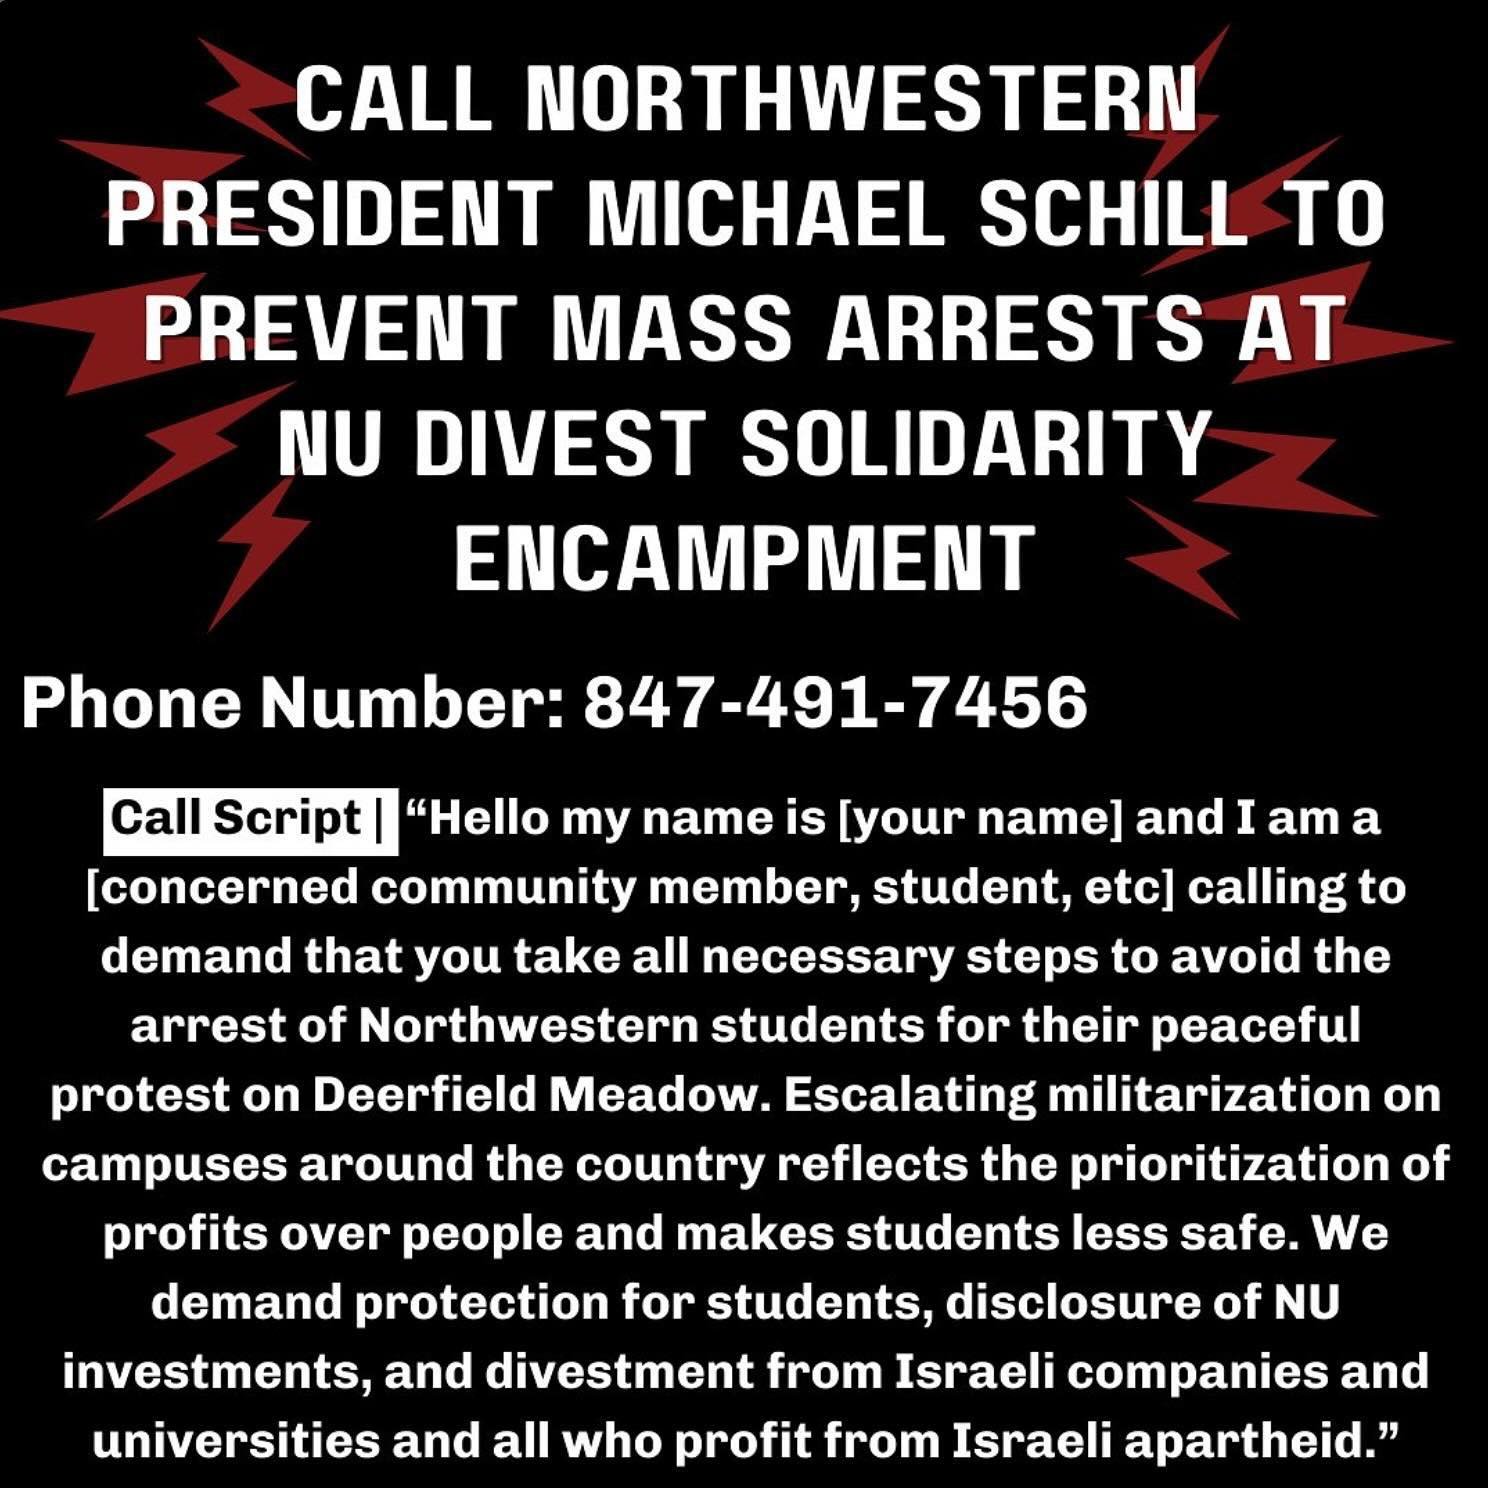 @nudivestmentcoalition have asked us to call the admin to demand NO ARRESTS!!

Email: nupresident@northwestern.edu